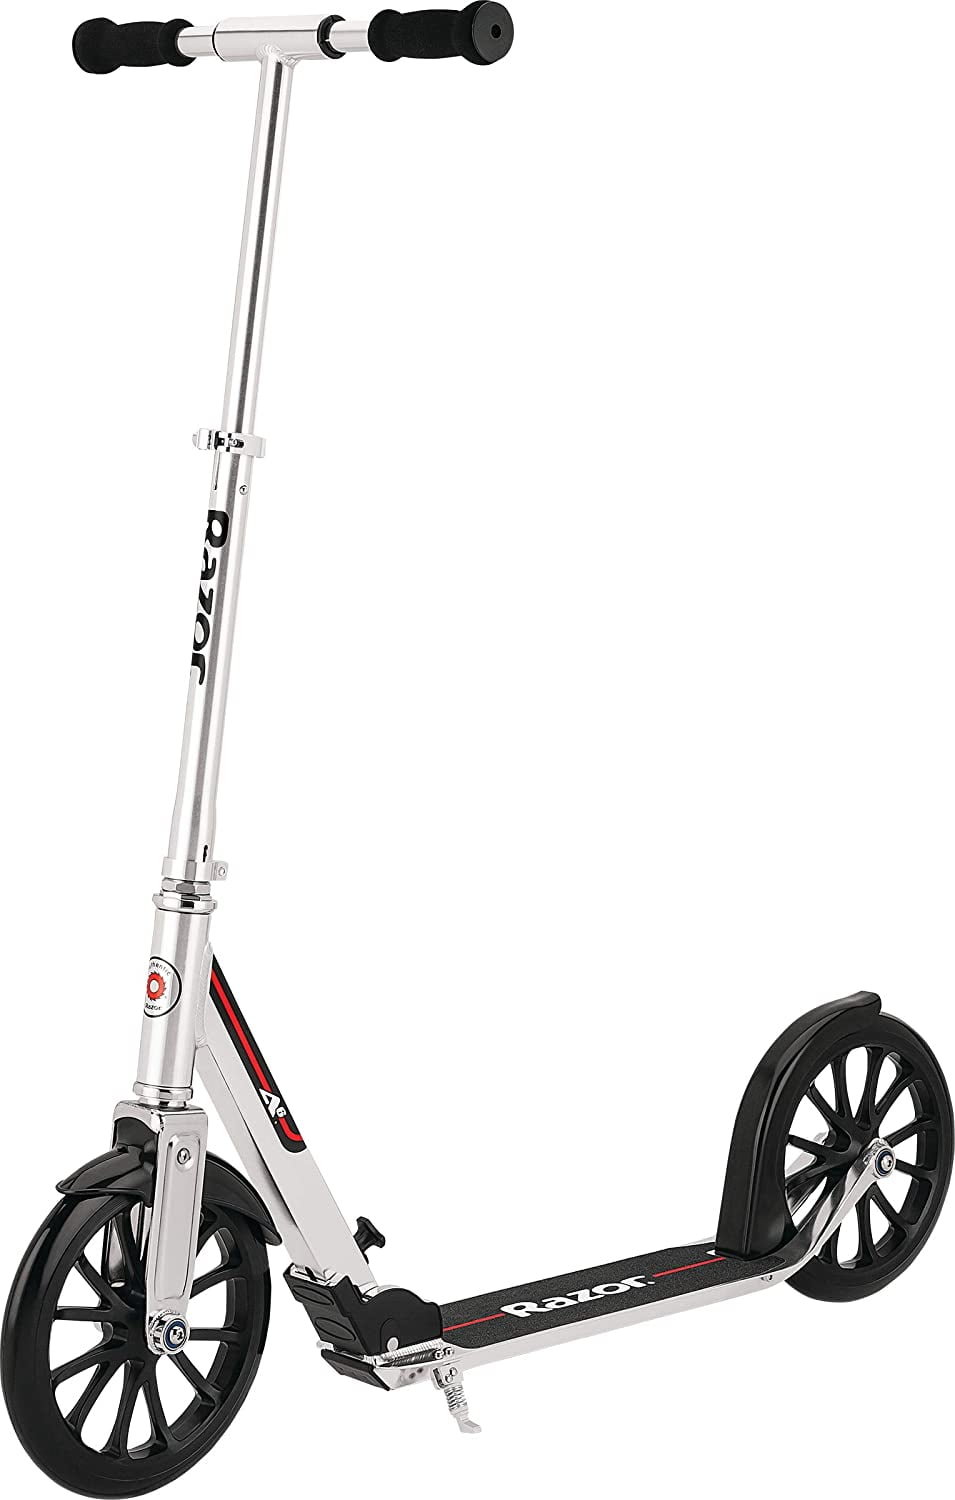 generic Kick Scooter for Kids 8+ - Extra-Tall Handlebars & Longer Deck, 10" Urethane Wheels, Anti-Rattle Technology, For Riders Up 220 lbs - Walmart.com